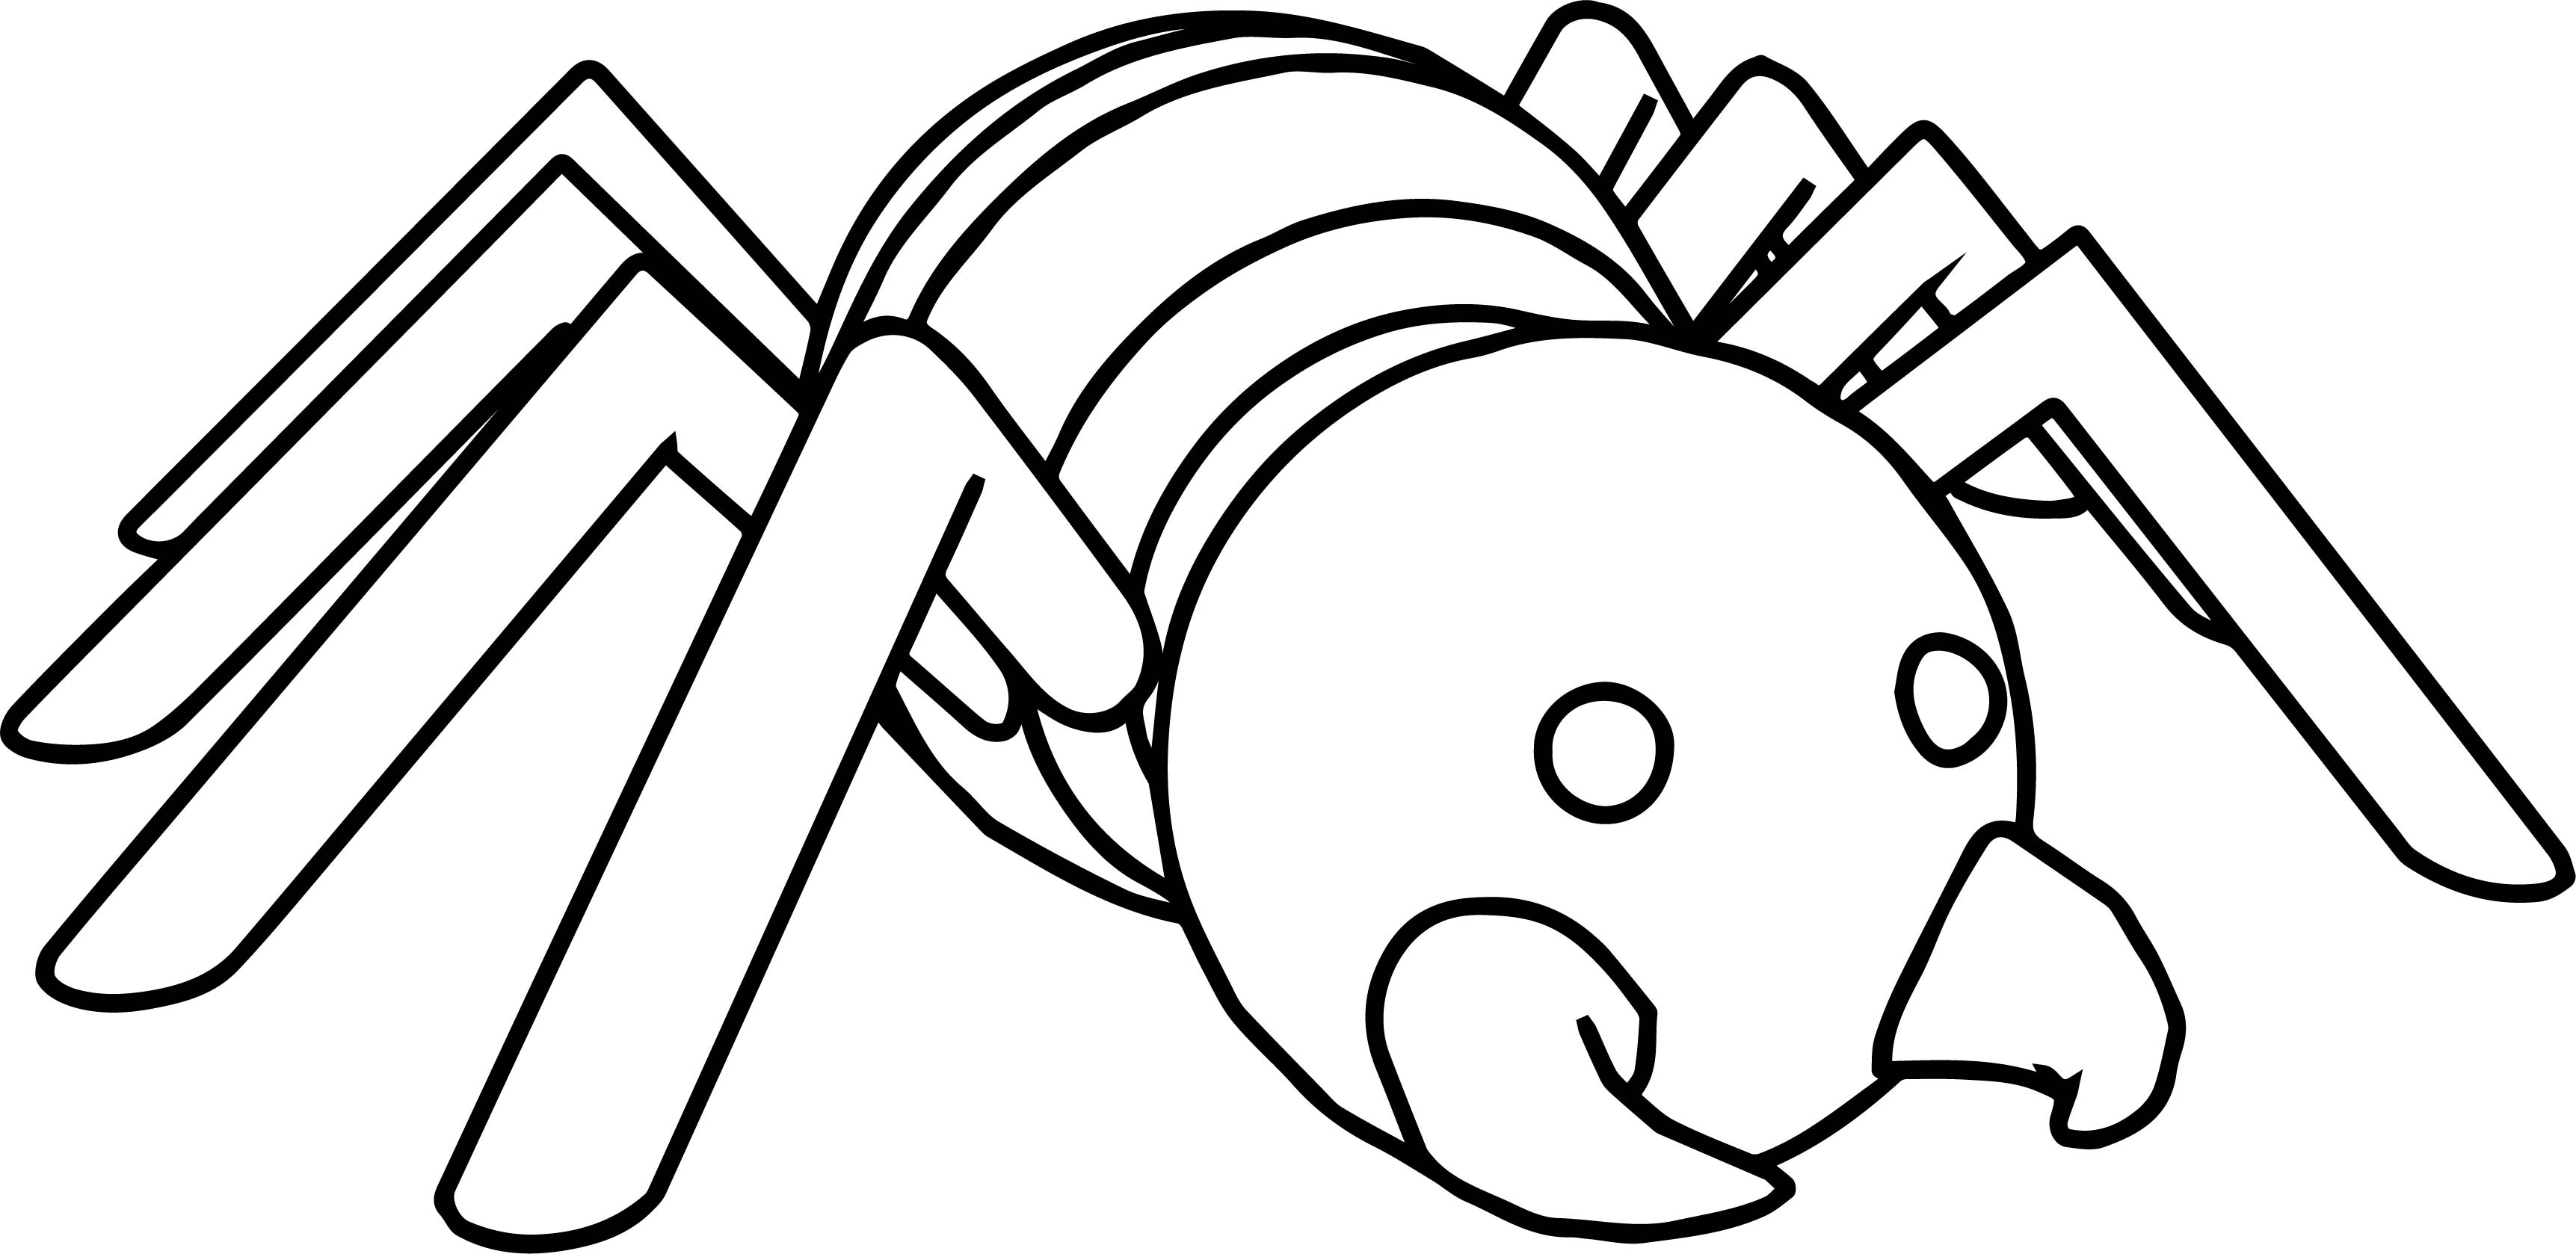 Cartoon Spider Coloring Pages at GetDrawings Free download